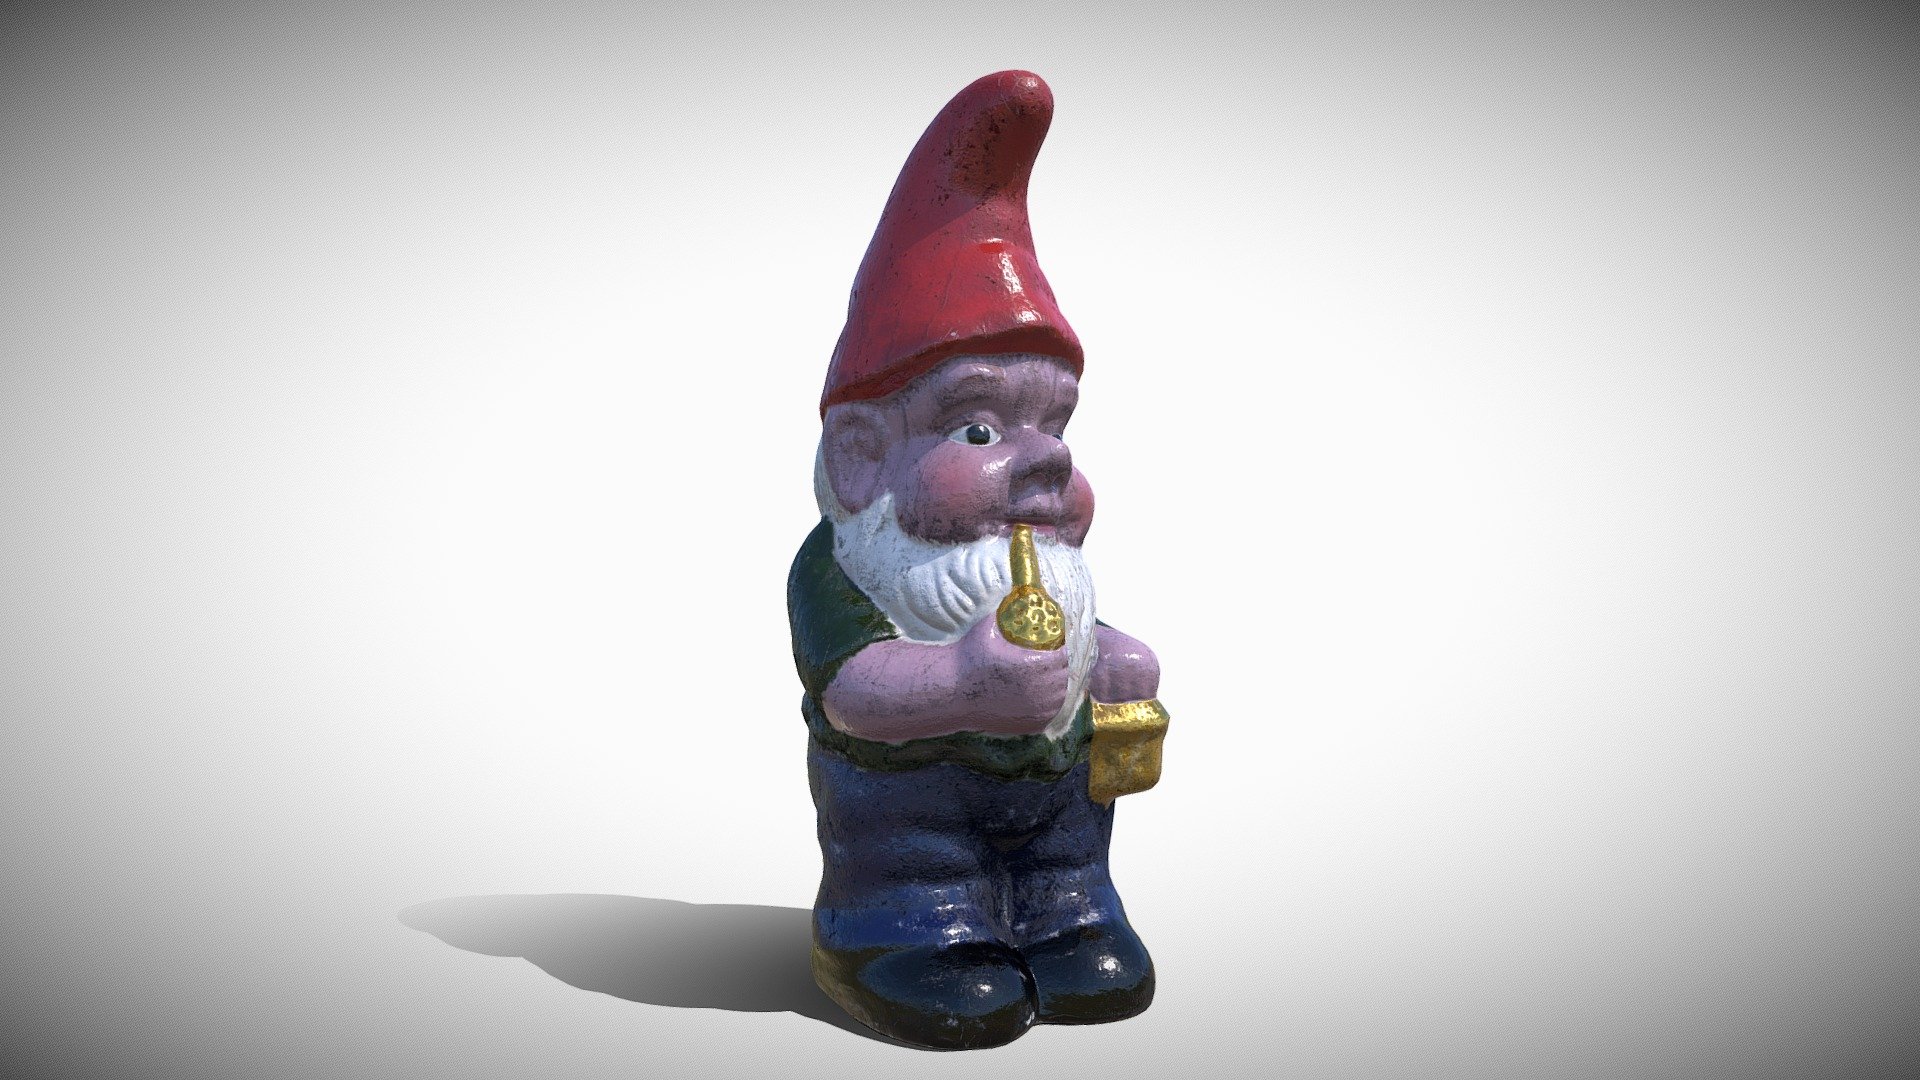 PBR Dwarf
!!! New MODELS &amp; SALES at: https://www.bonboniere3d.com/ only !!!
Free download until: 31.05.2019

Geometry: Polygonal Quads/Tris
Polygons: 6,904
Vertices: 6,906

Materials: Vray PBR + Standart

Textures: 1 x Variations 8192x8192

dwarf_trpaslik_diffuse.jpg - resolution 8192x8192
dwarf_trpaslik_fresnel_ior.jpg - resolution 8192x8192
dwarf_trpaslik_glossiness.jpg - resolution 8192x8192
dwarf_trpaslik_metalness.jpg - resolution 8192x8192
dwarf_trpaslik_normal_map.jpg - resolution 8192x8192
dwarf_trpaslik_normal_map_22.jpg - resolution 8192x8192
dwarf_trpaslik_reflection.jpg - resolution 8192x8192
dwarf_trpaslik_roughness.jpg - resolution 8192x8192

Rigged: No

Animated: No

Unwrapped UVs: Yes - PBR_Dwarf - Buy Royalty Free 3D model by bonboniere3d (@office) 3d model